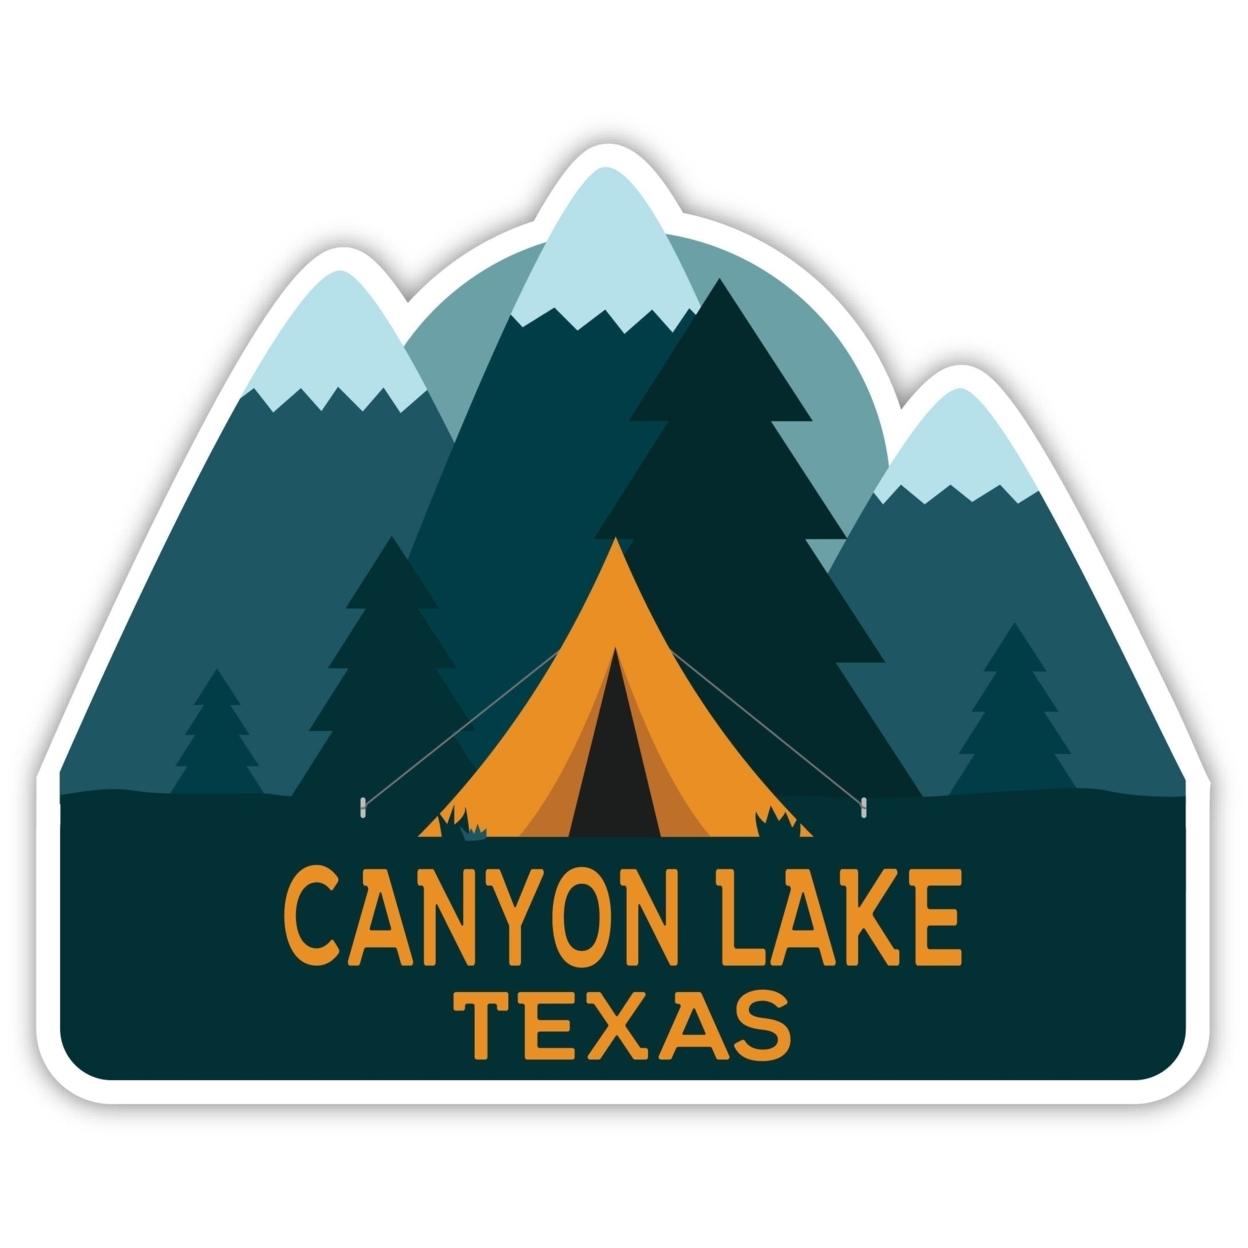 Canyon Lake Texas Souvenir Decorative Stickers (Choose Theme And Size) - 4-Pack, 12-Inch, Tent